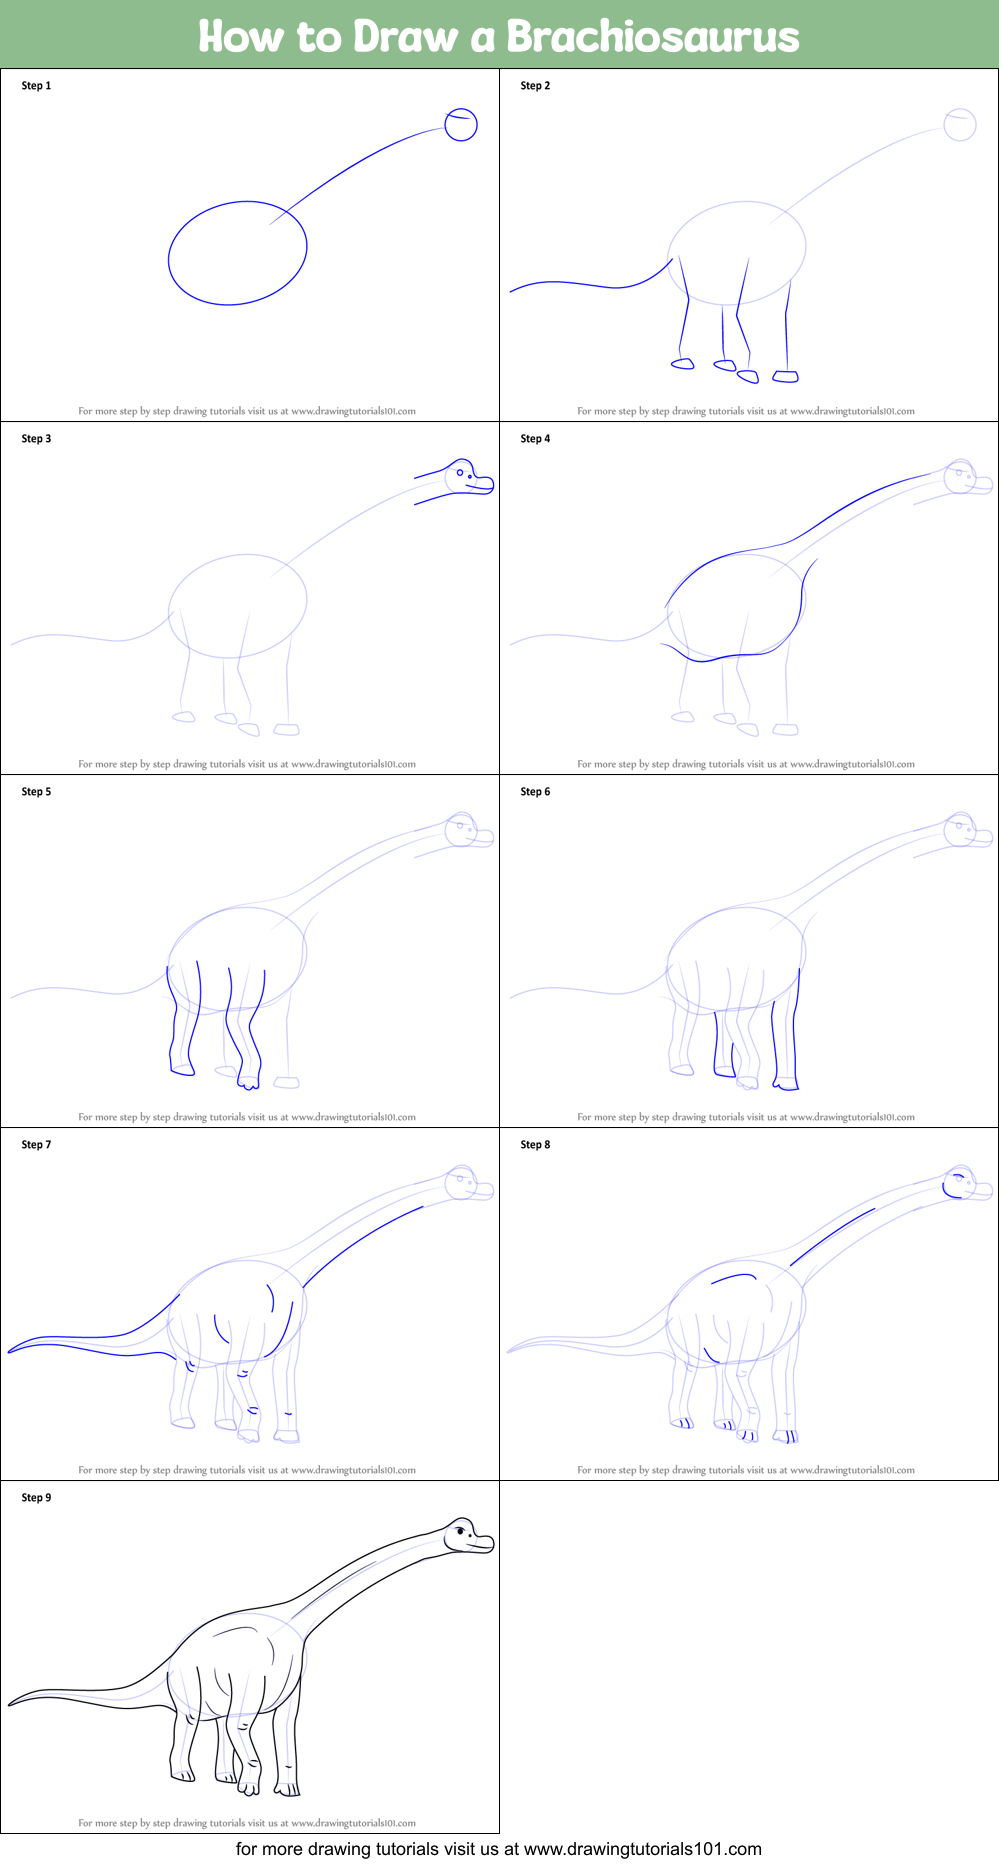 How to Draw a Brachiosaurus printable step by step drawing sheet